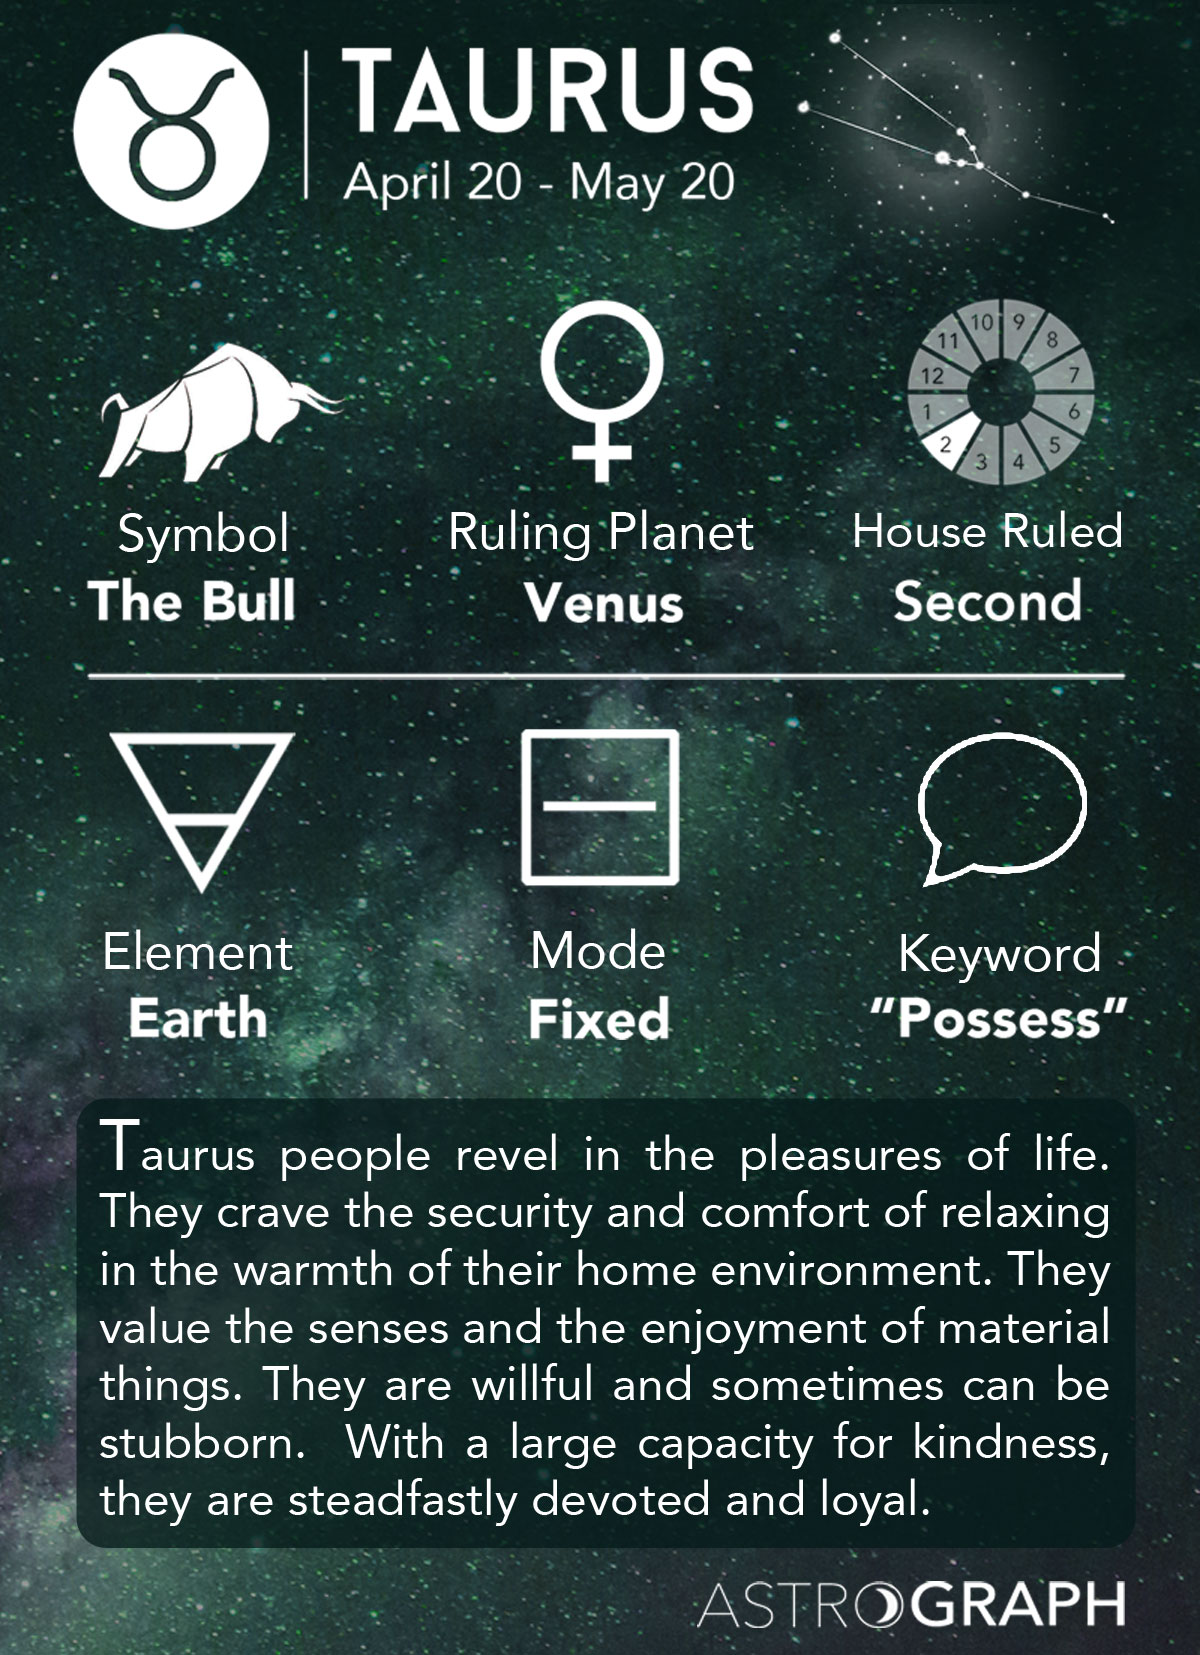 What Are Taurus Zodiac Signs?